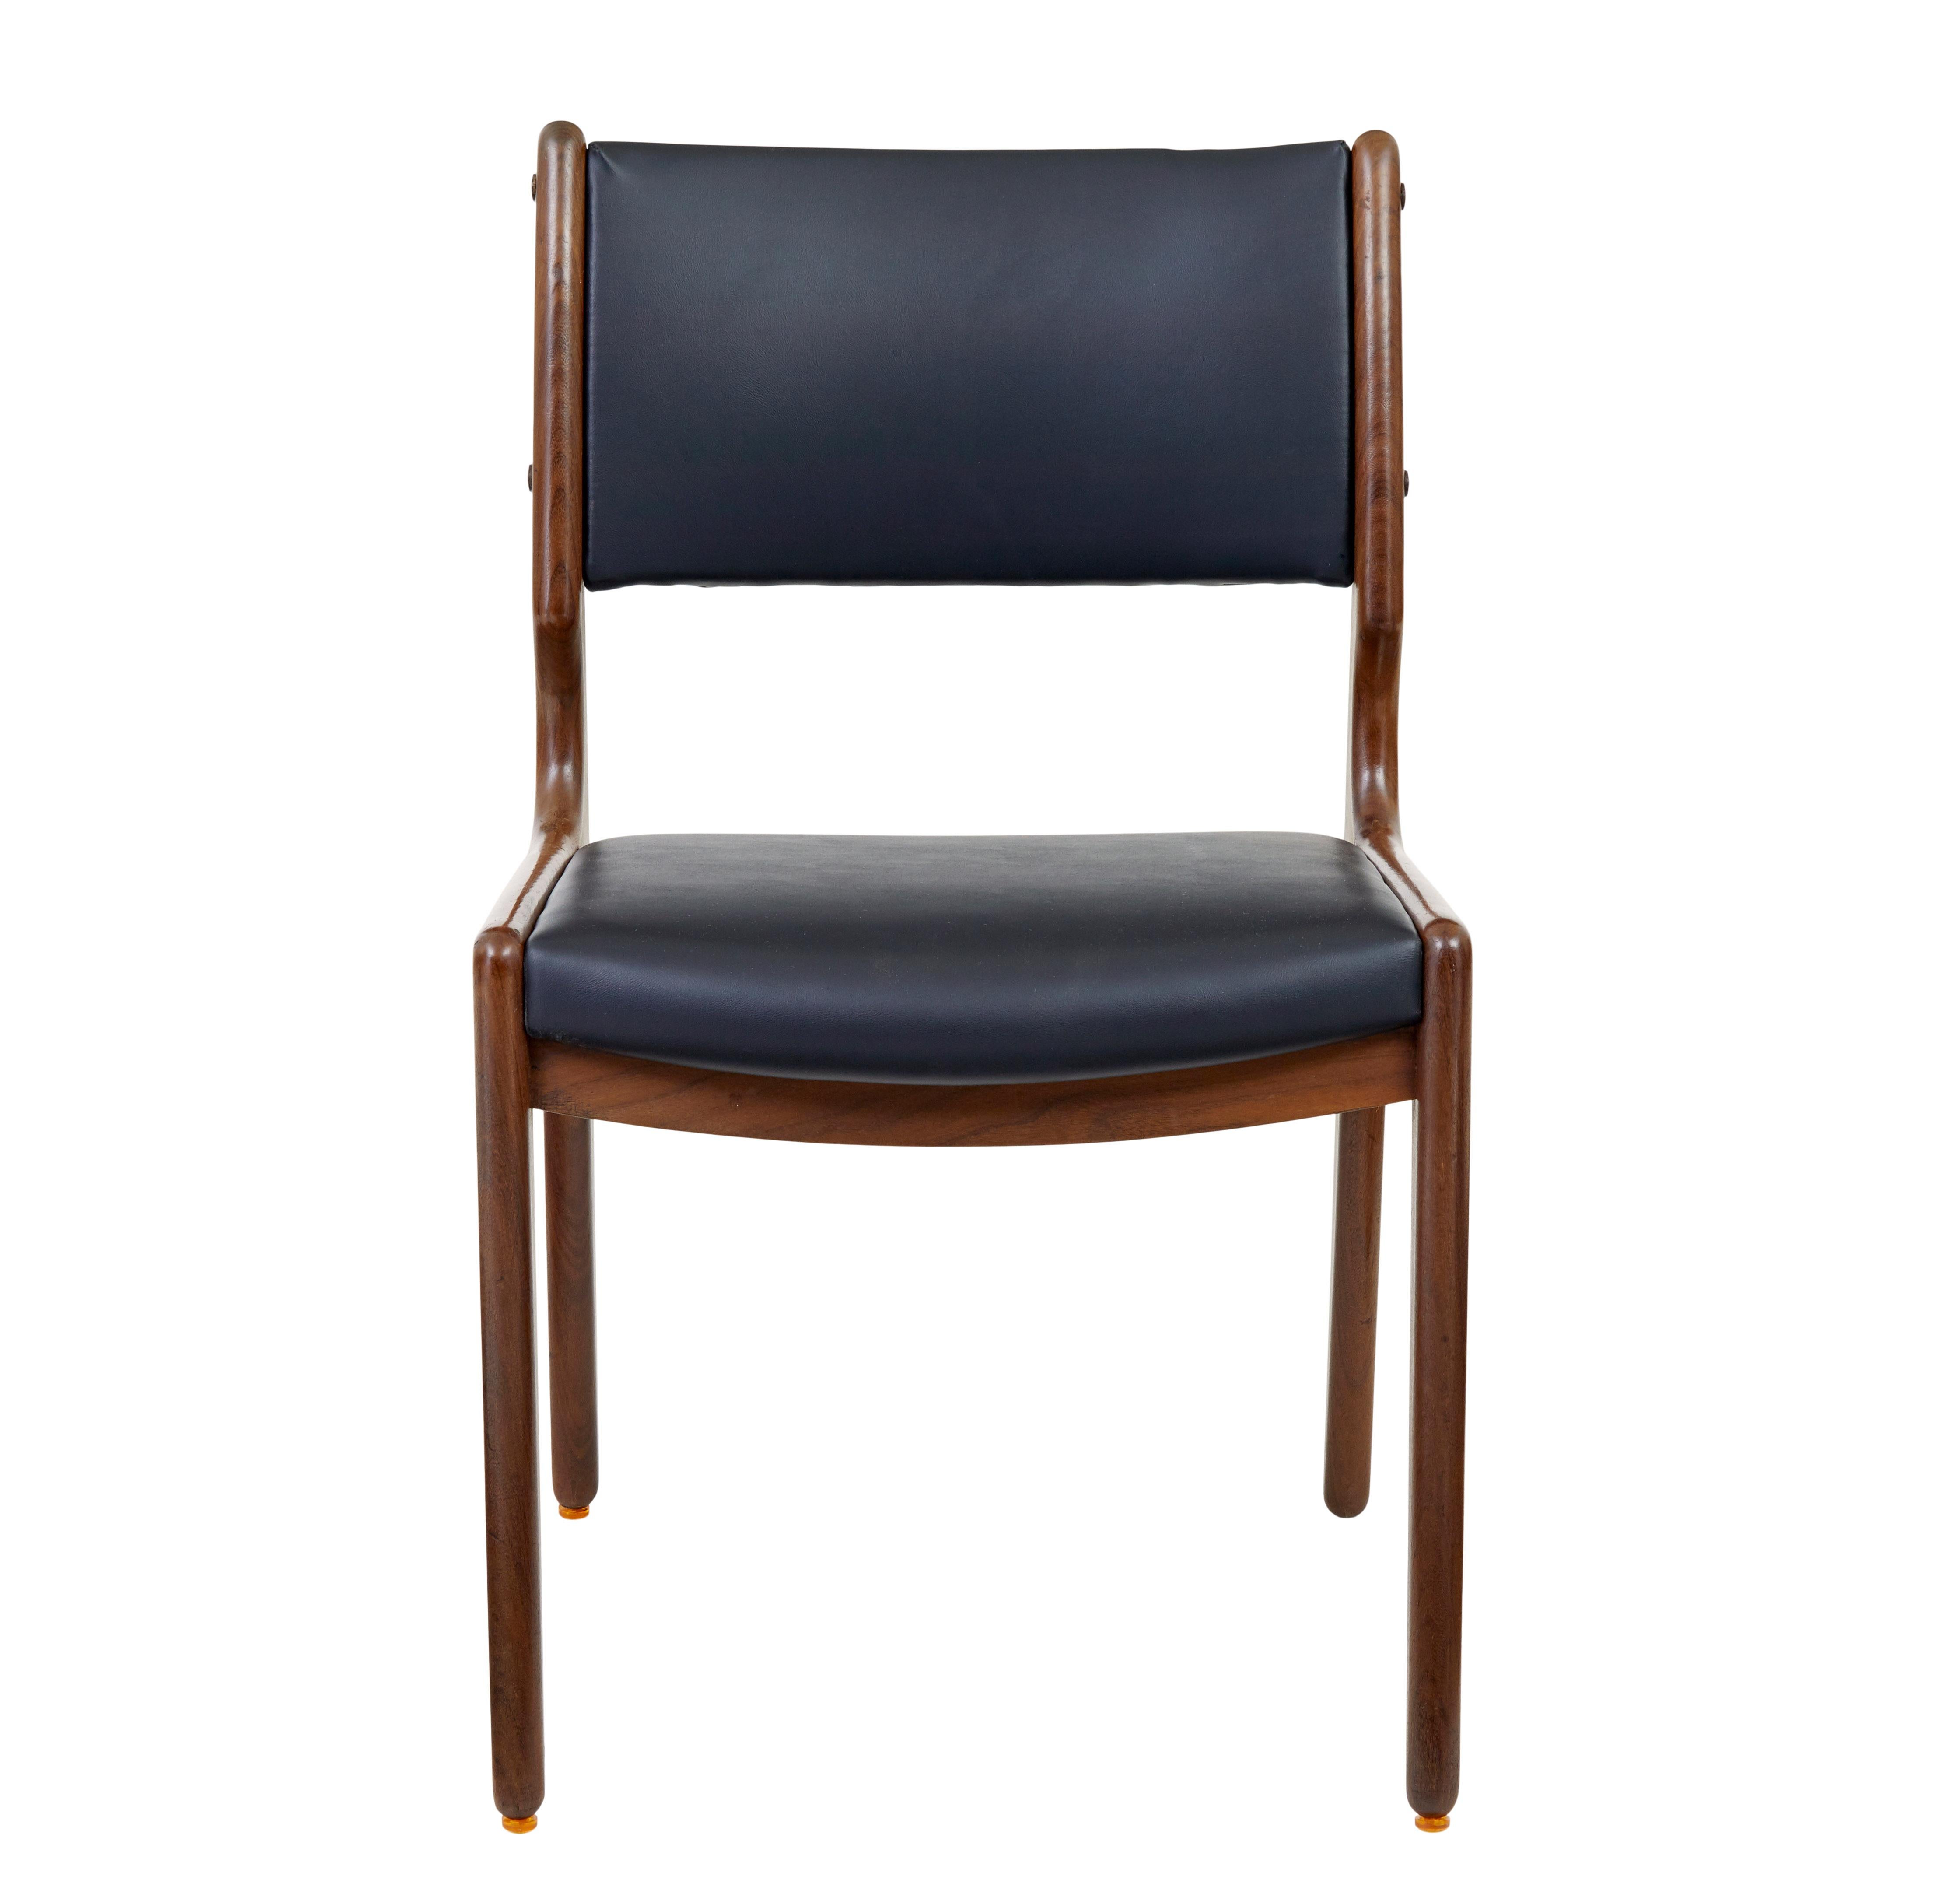 Danish set of 6 mid 20th century teak and leather dining chairs, circa 1960.

fine example of midcentury danish design. Presented in walnut coloured teak and upholstered in a supple black faux leather.

Show frame design which allows us to see